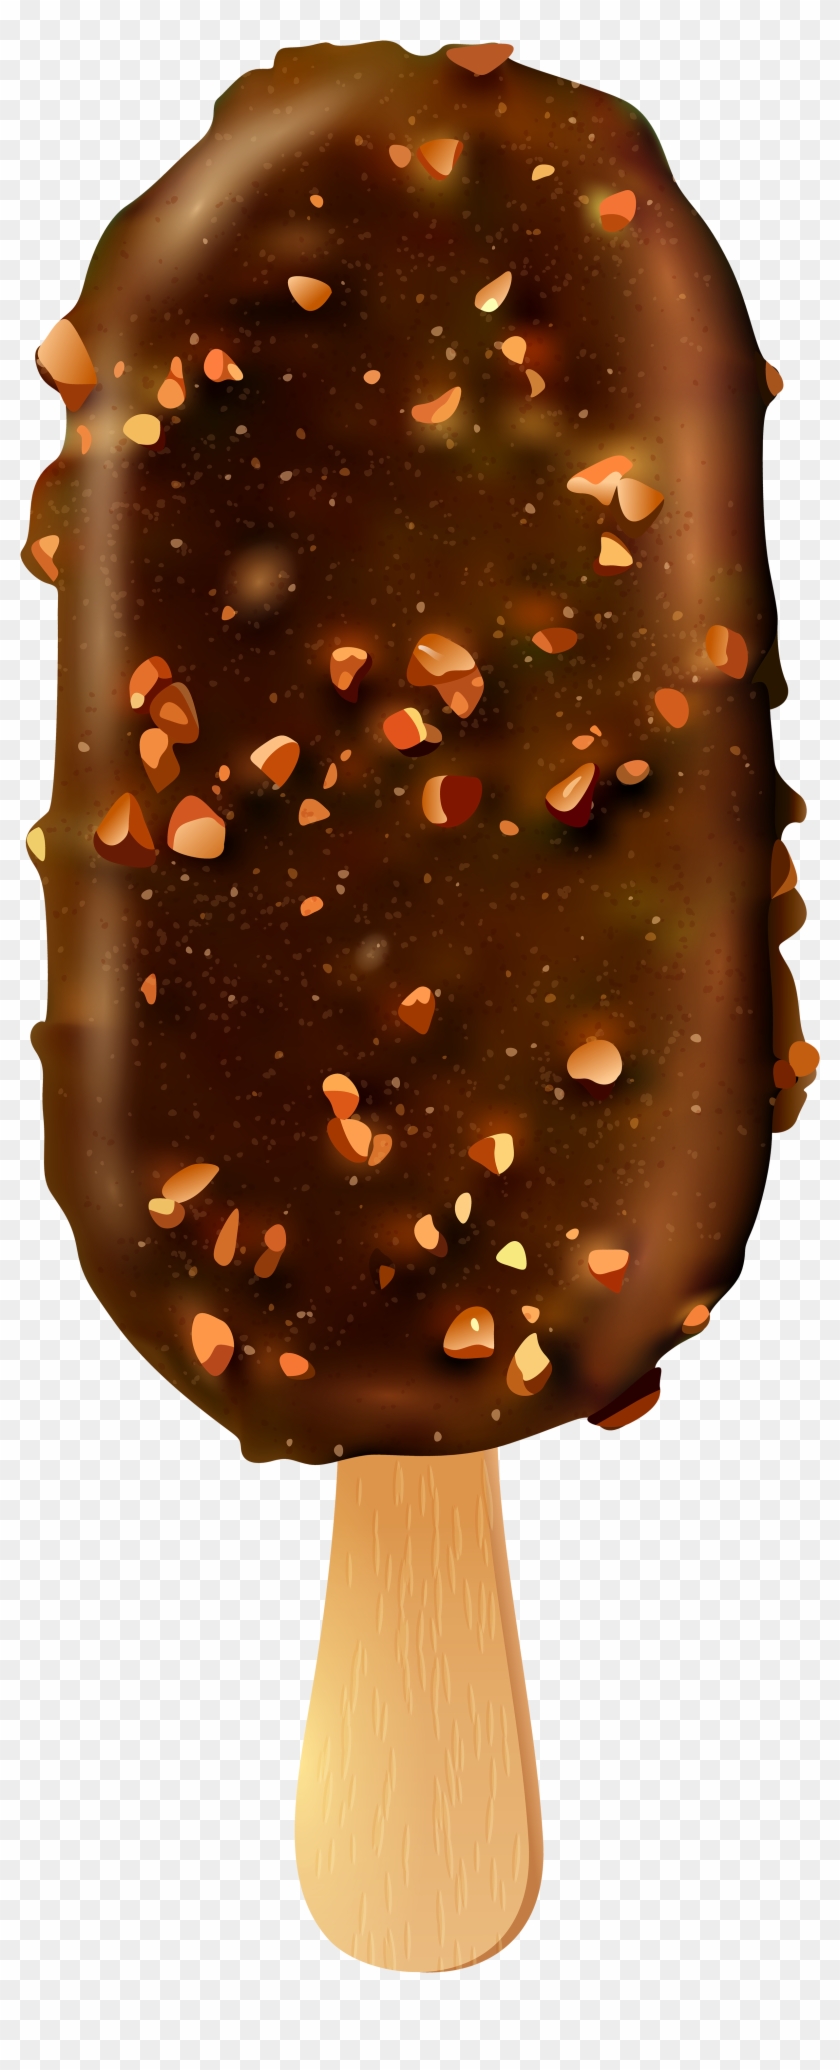 Ice Cream And Nuts Stick Png Clip Art - Stick Ice Cream Png Transparent Png